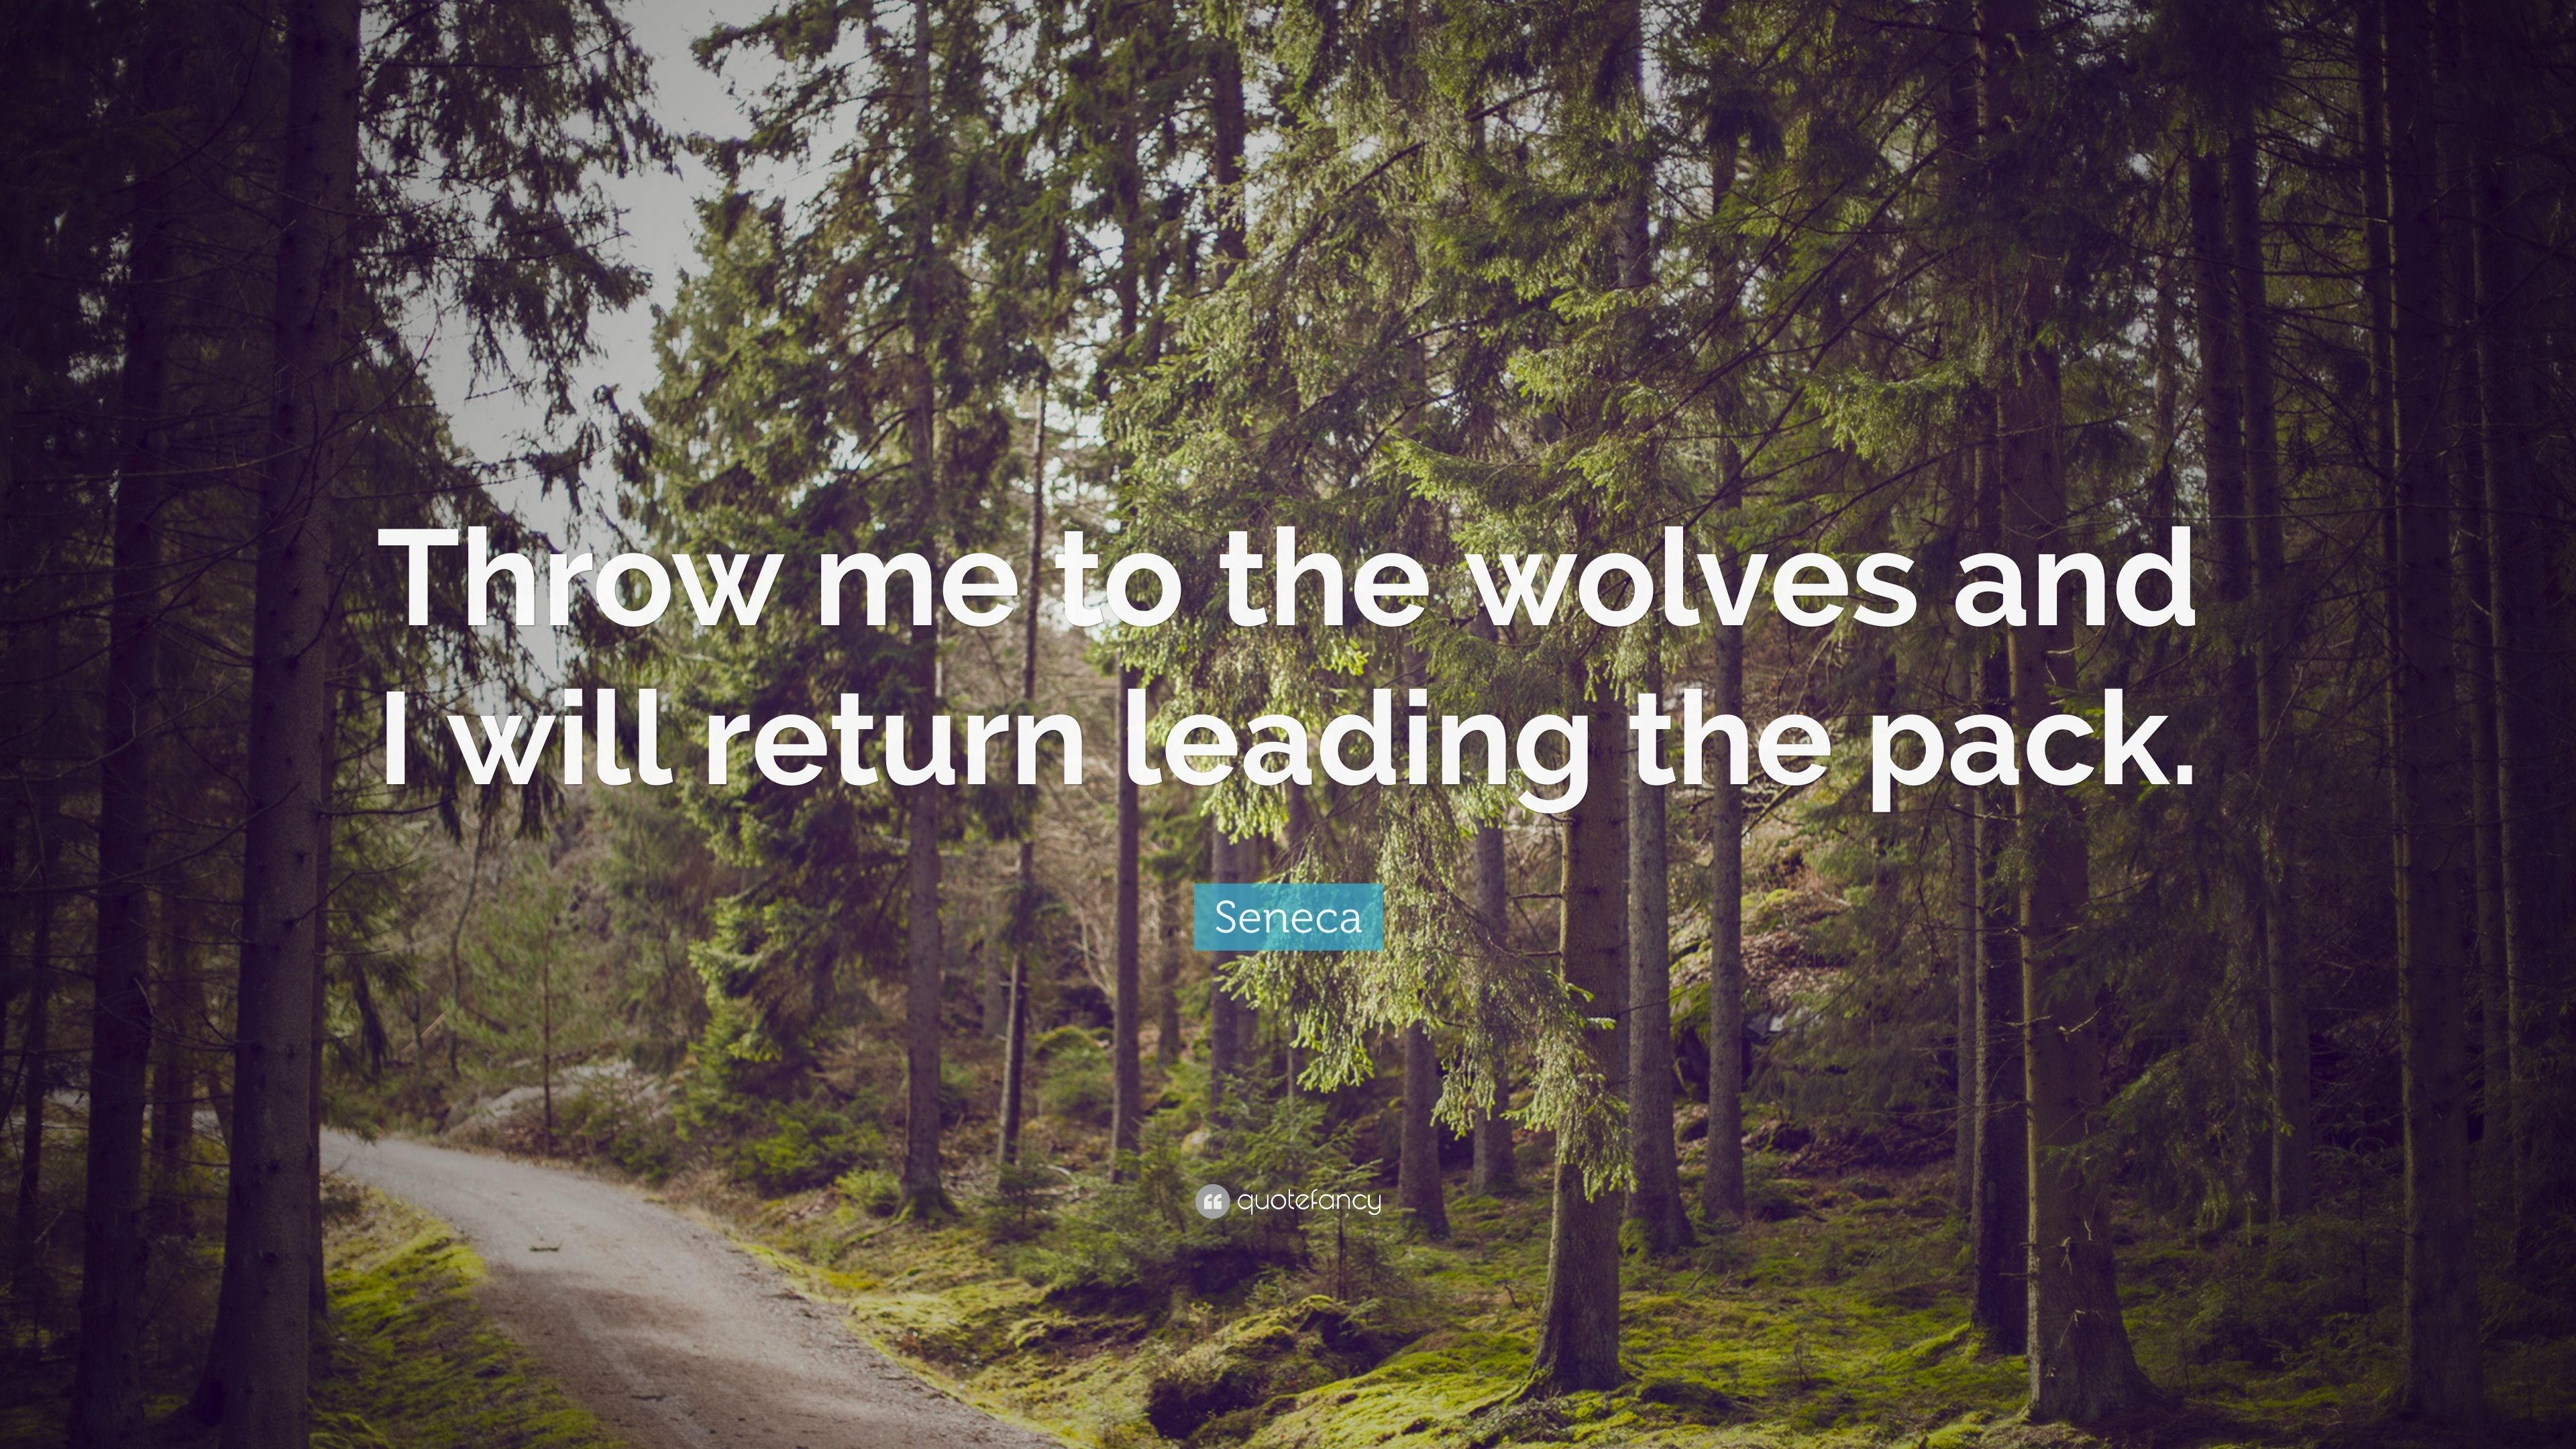 Seneca Quote: “Throw me to the wolves and I will return leading